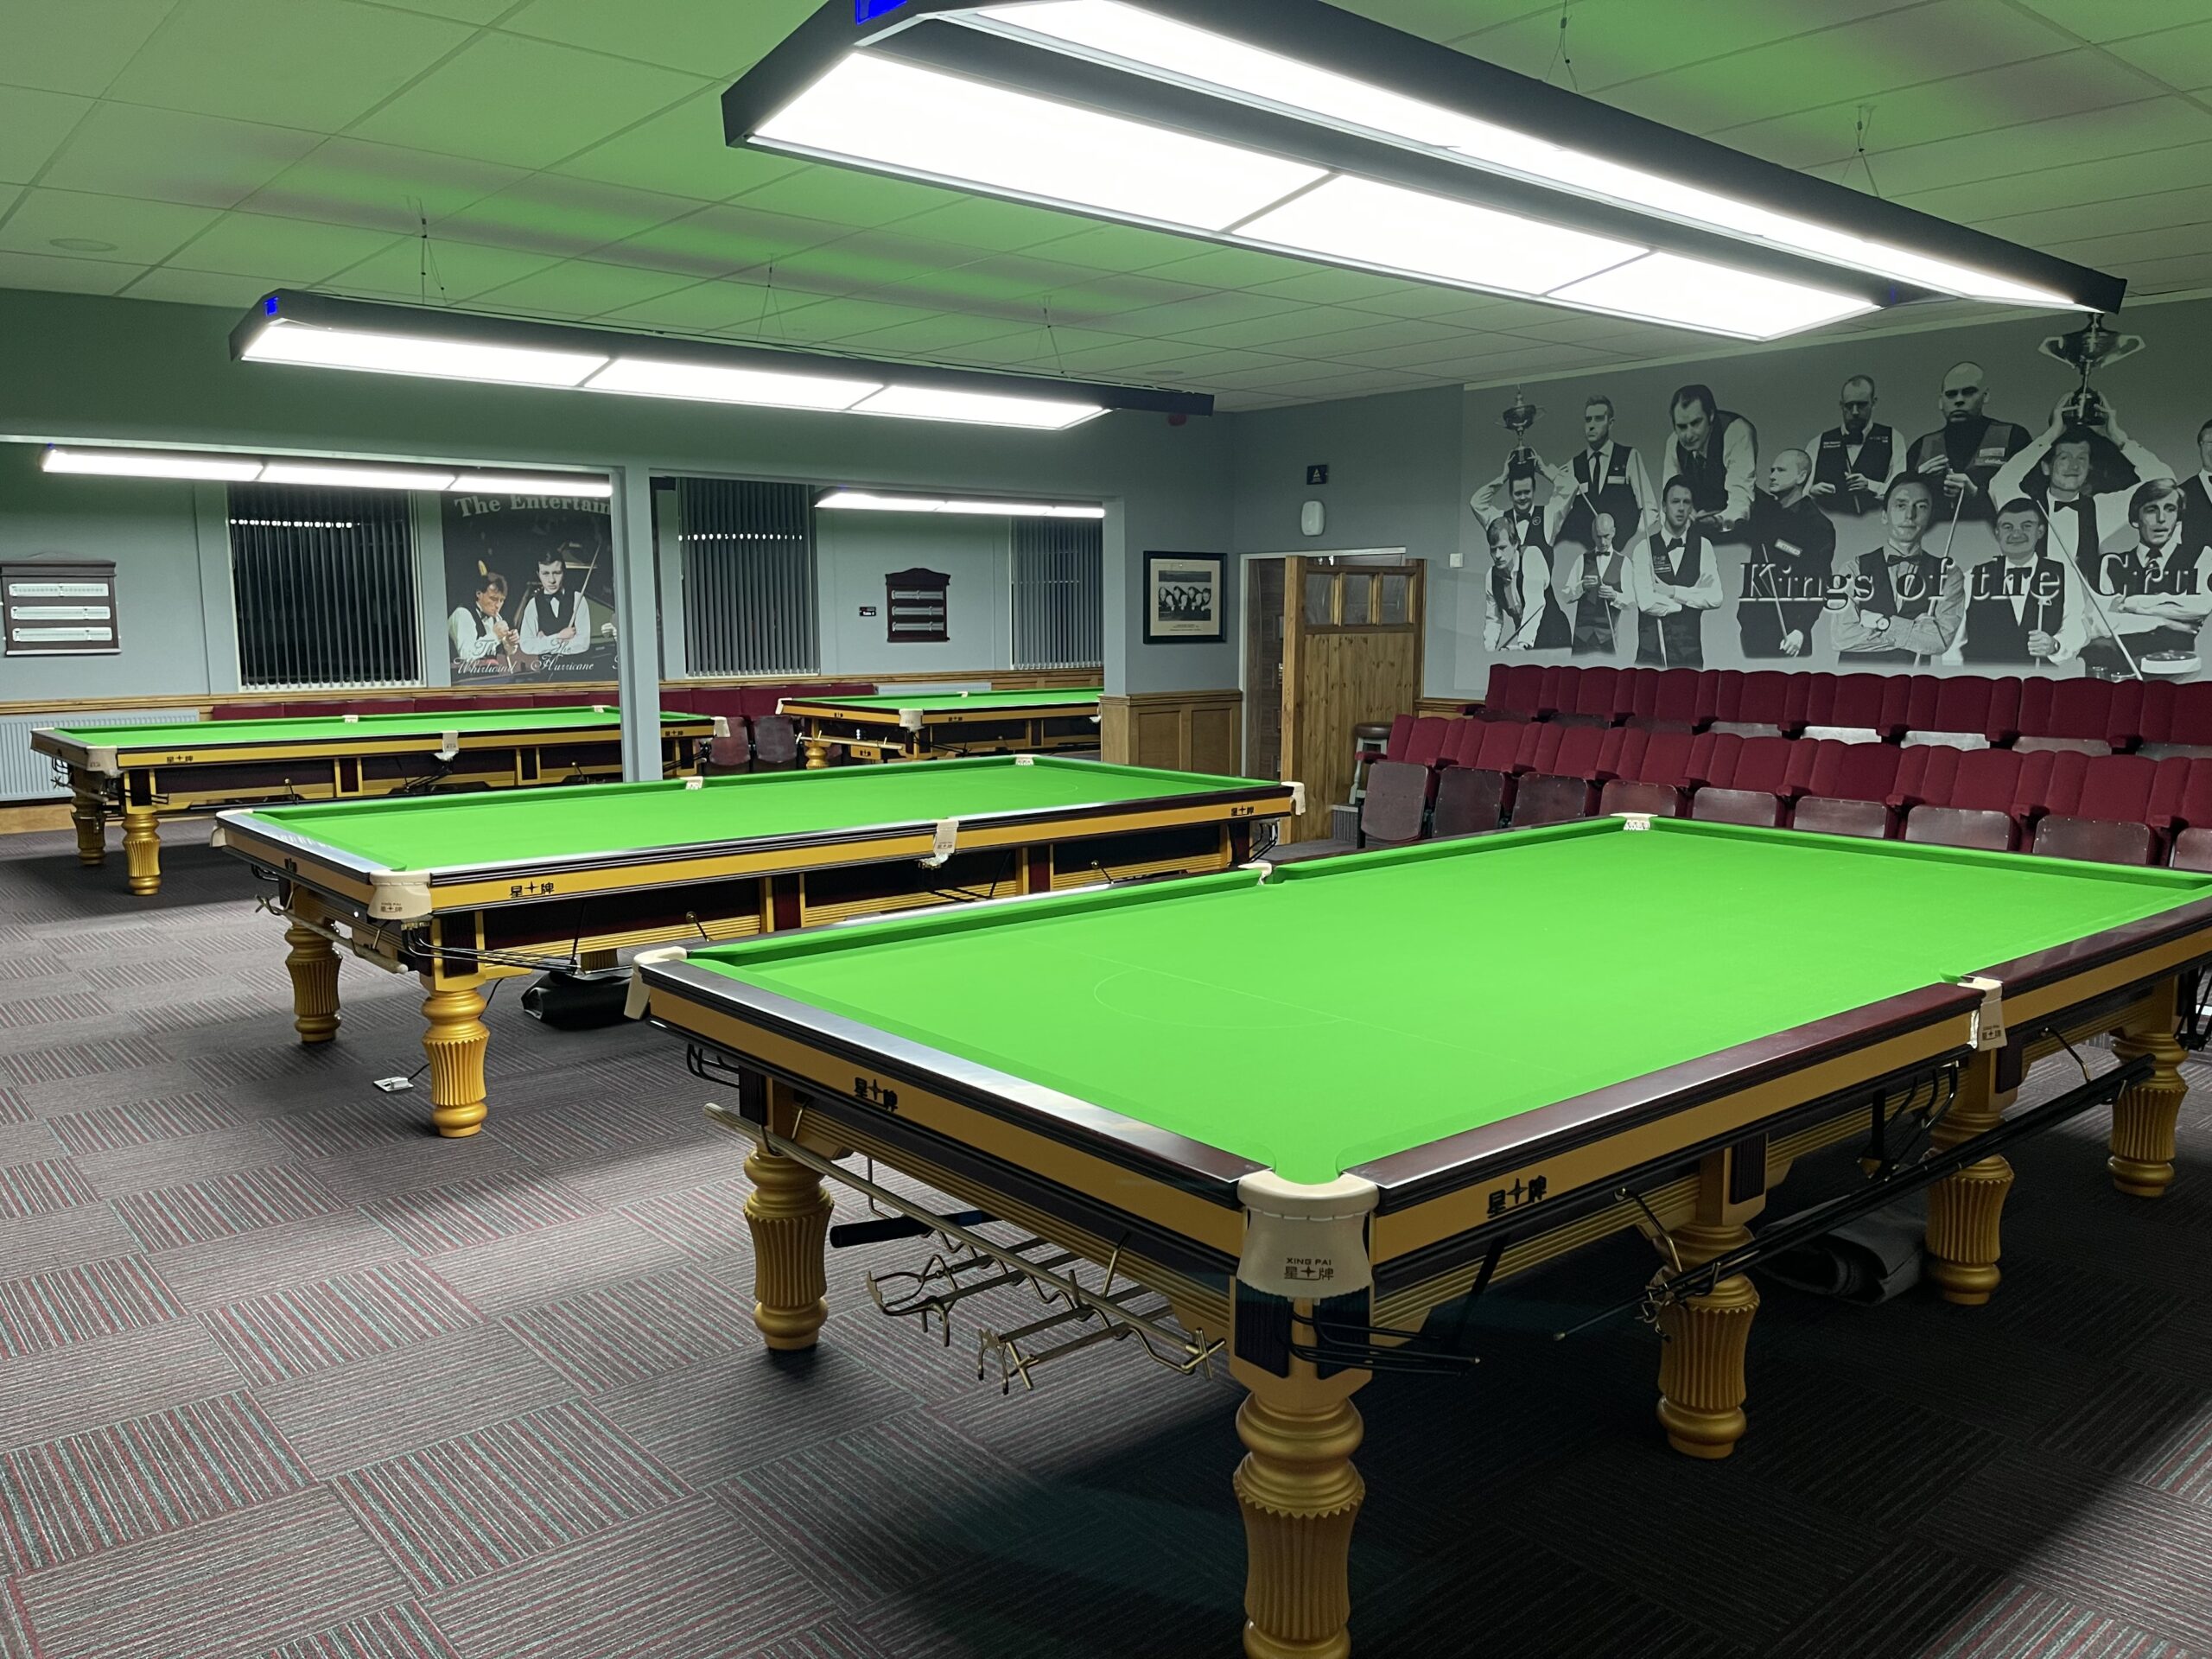 British Womens Open to be held at Landywood Snooker Club